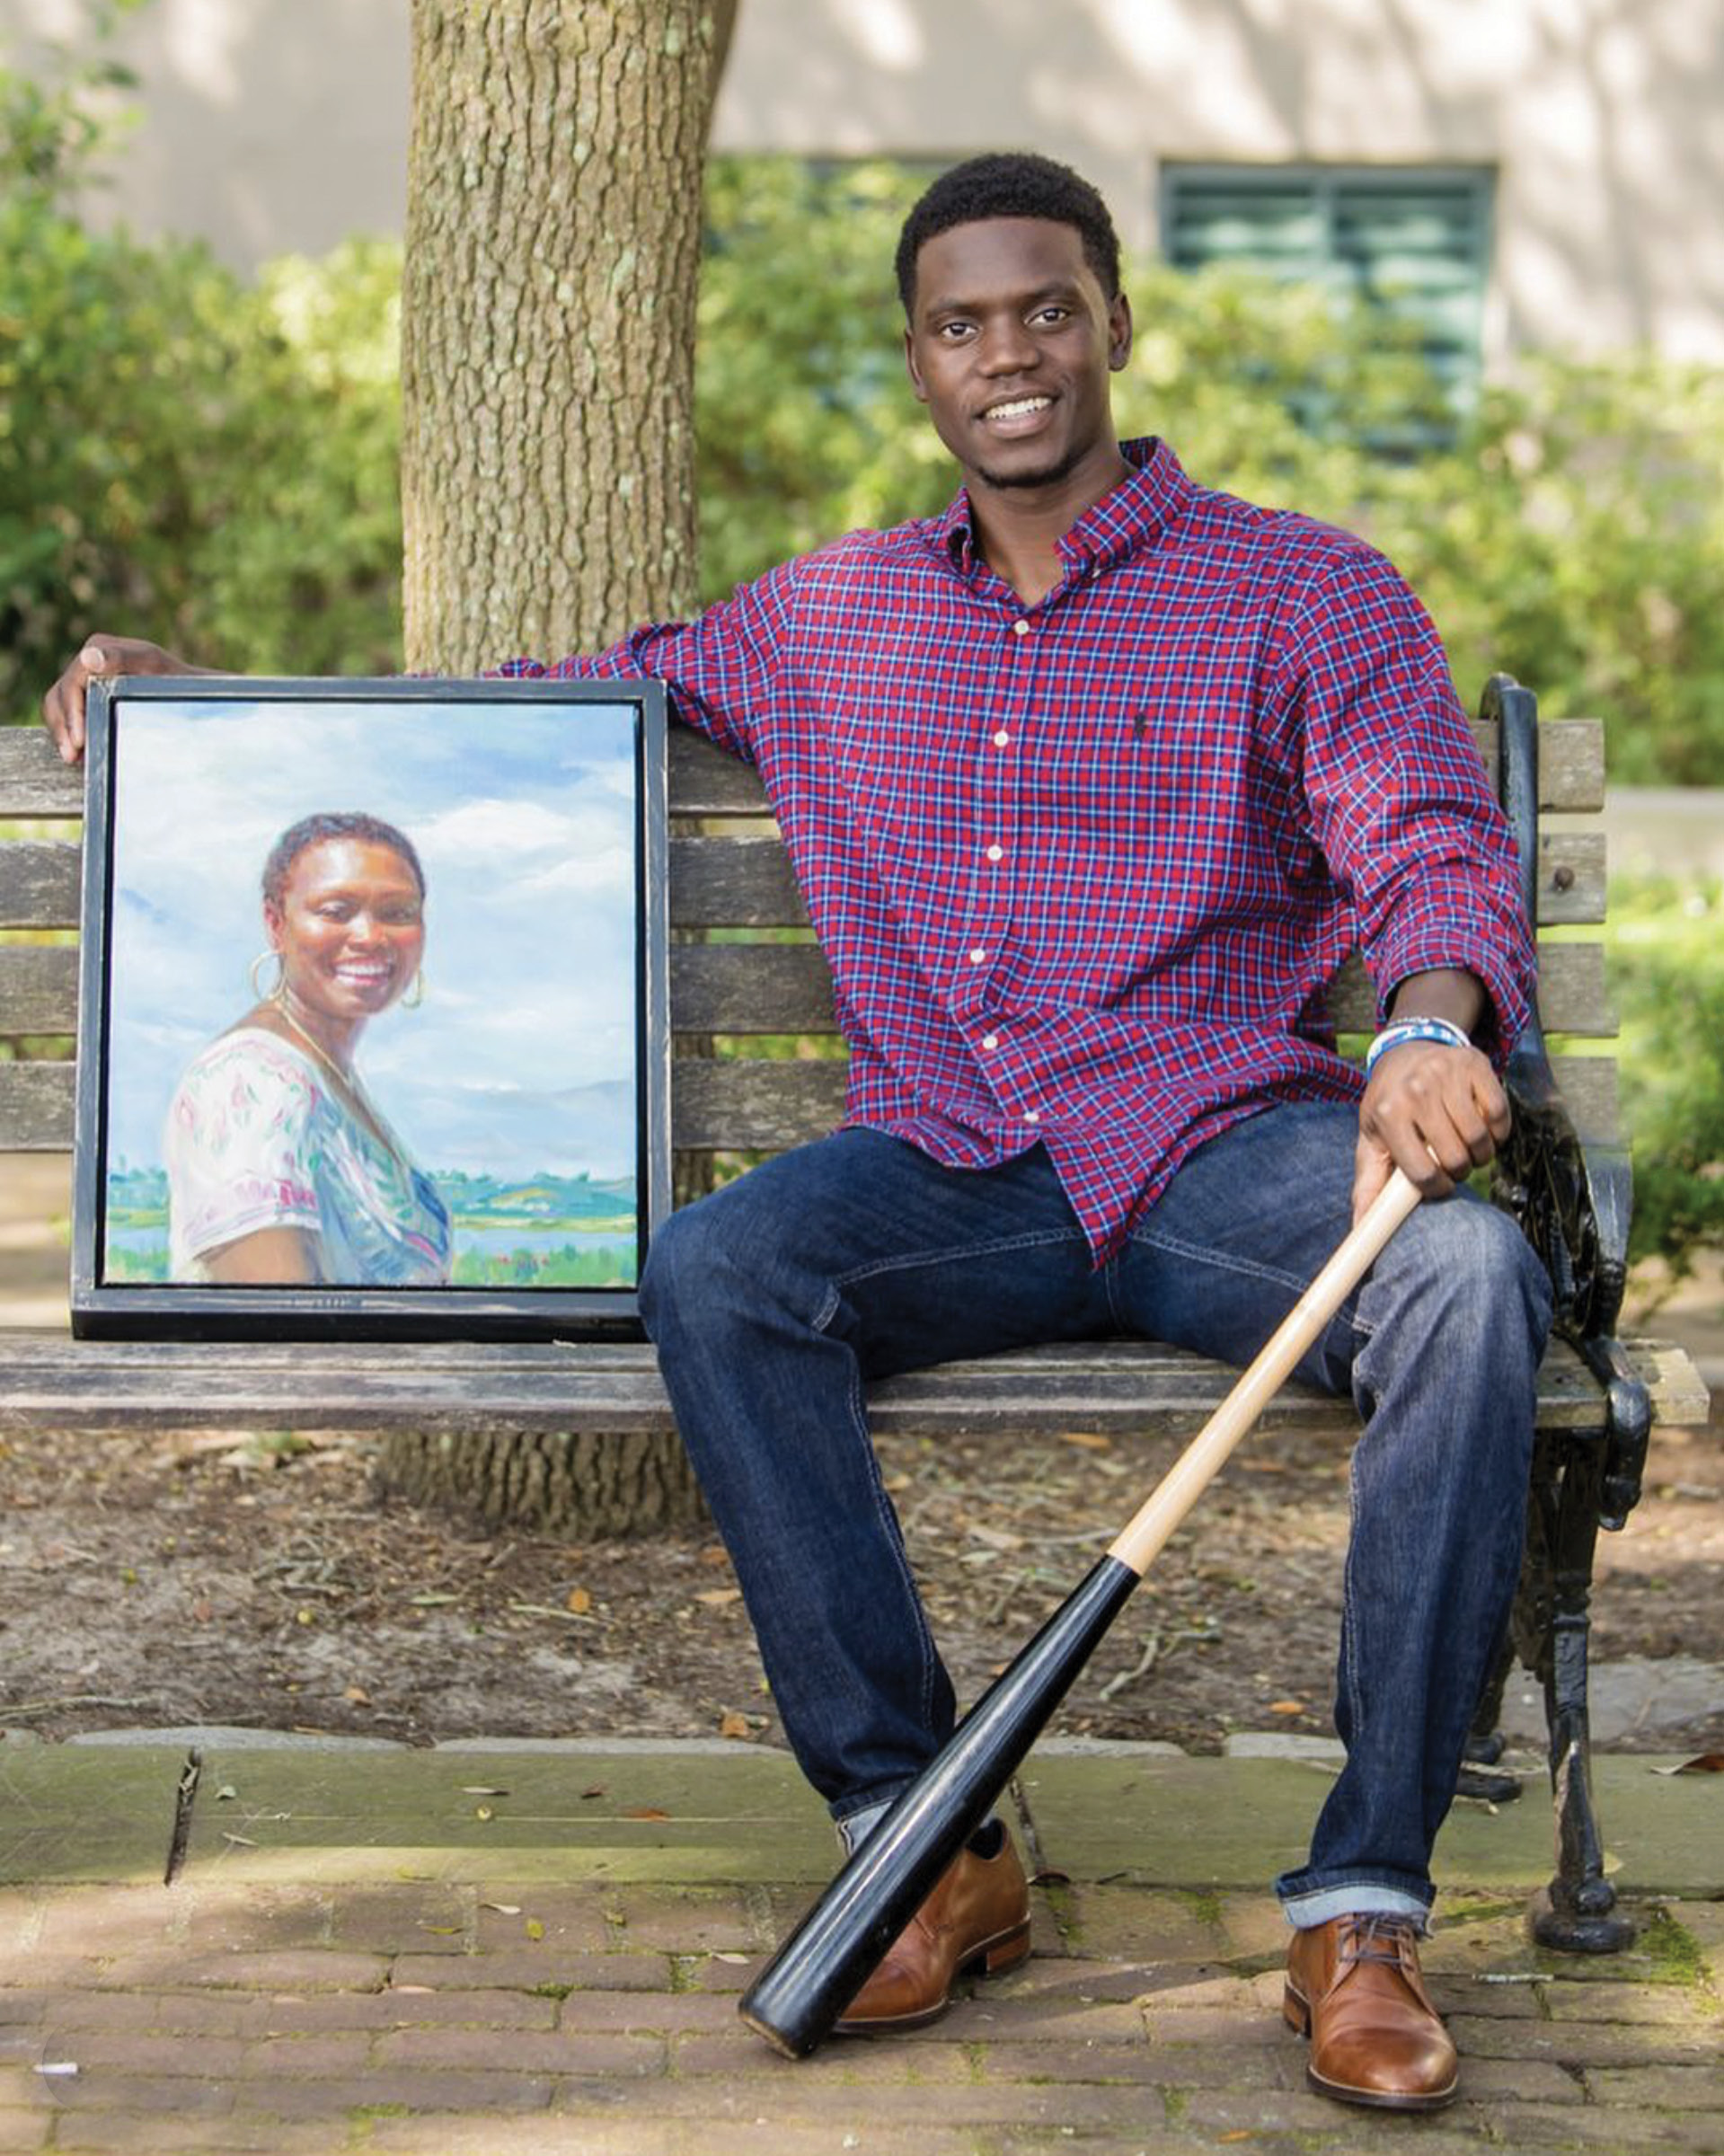 Chris Singleton, a former professional baseball player who is now an inspirational speaker and employee of the RiverDogs, with a portrait of his late mother painted by Ricky Mujica.